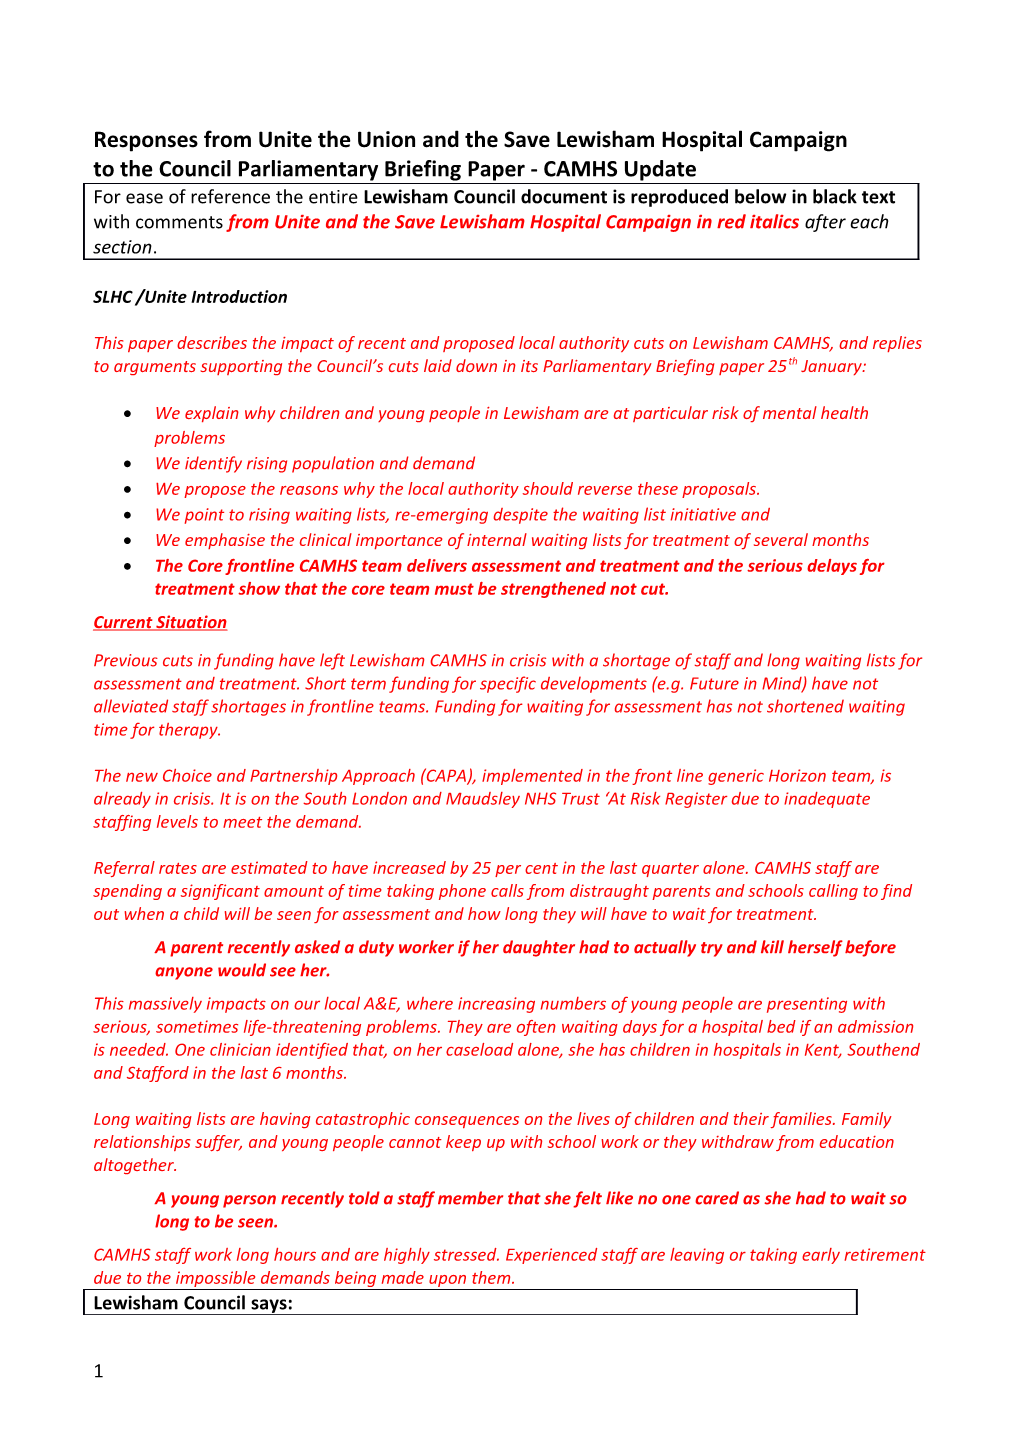 Responses from Unite the Union and the Save Lewisham Hospital Campaign to the Council